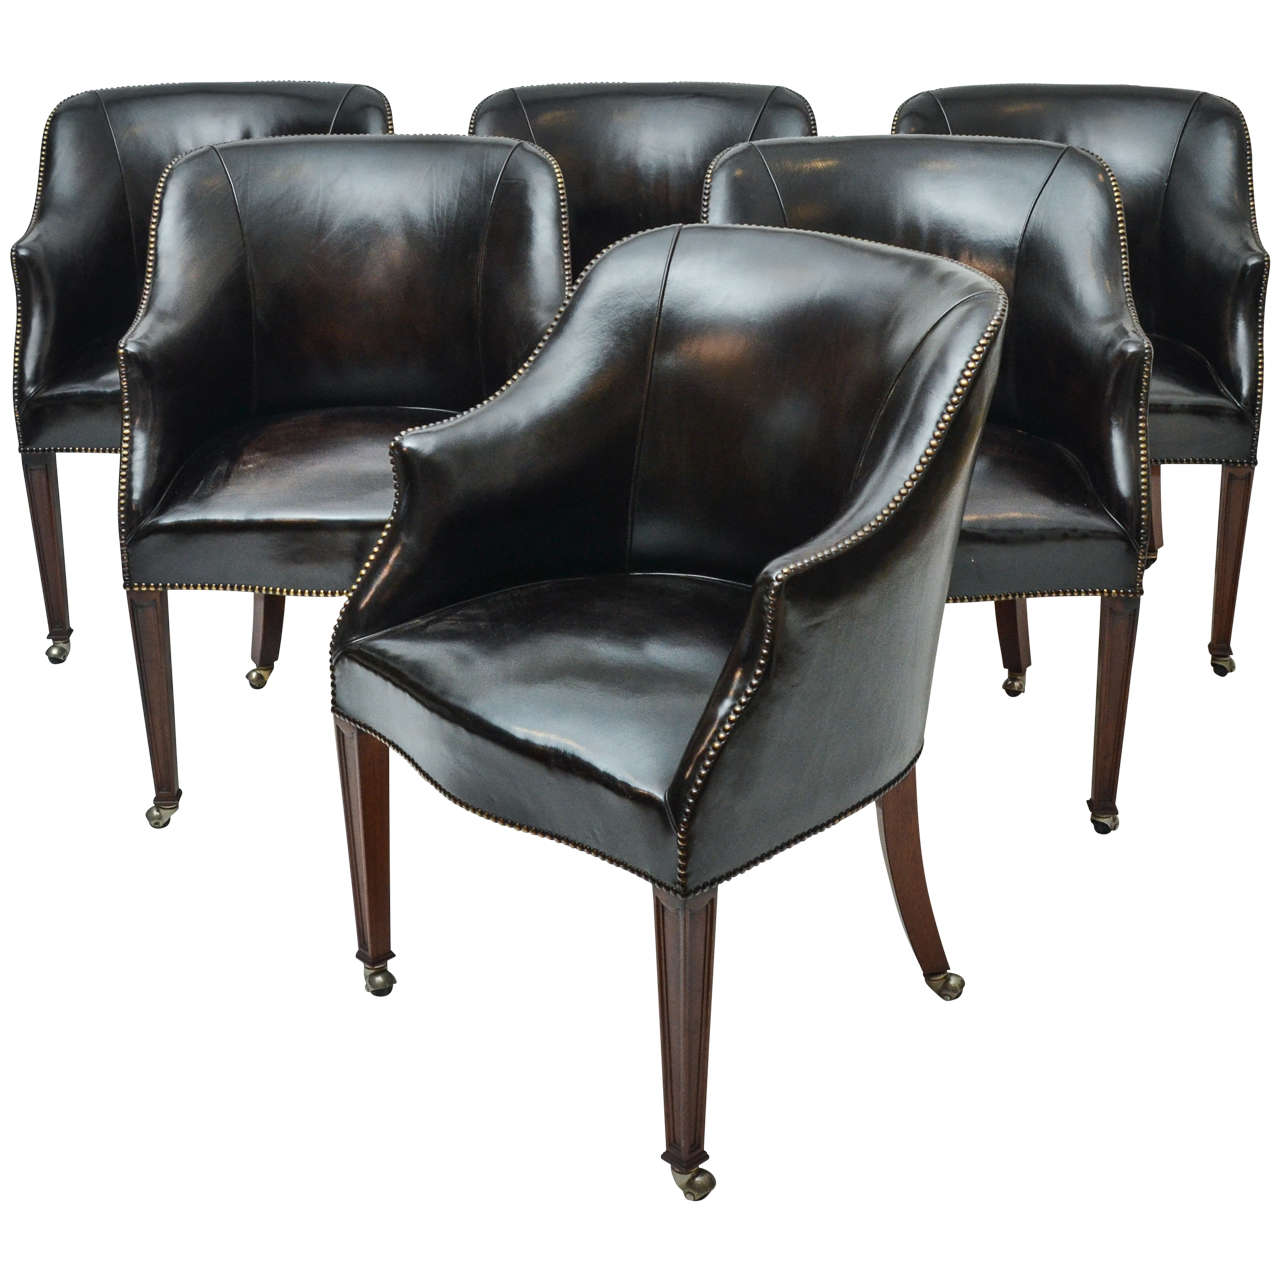 Set of Six 1940s Leather Upholstered Dining Chairs from London's Carlton Club For Sale